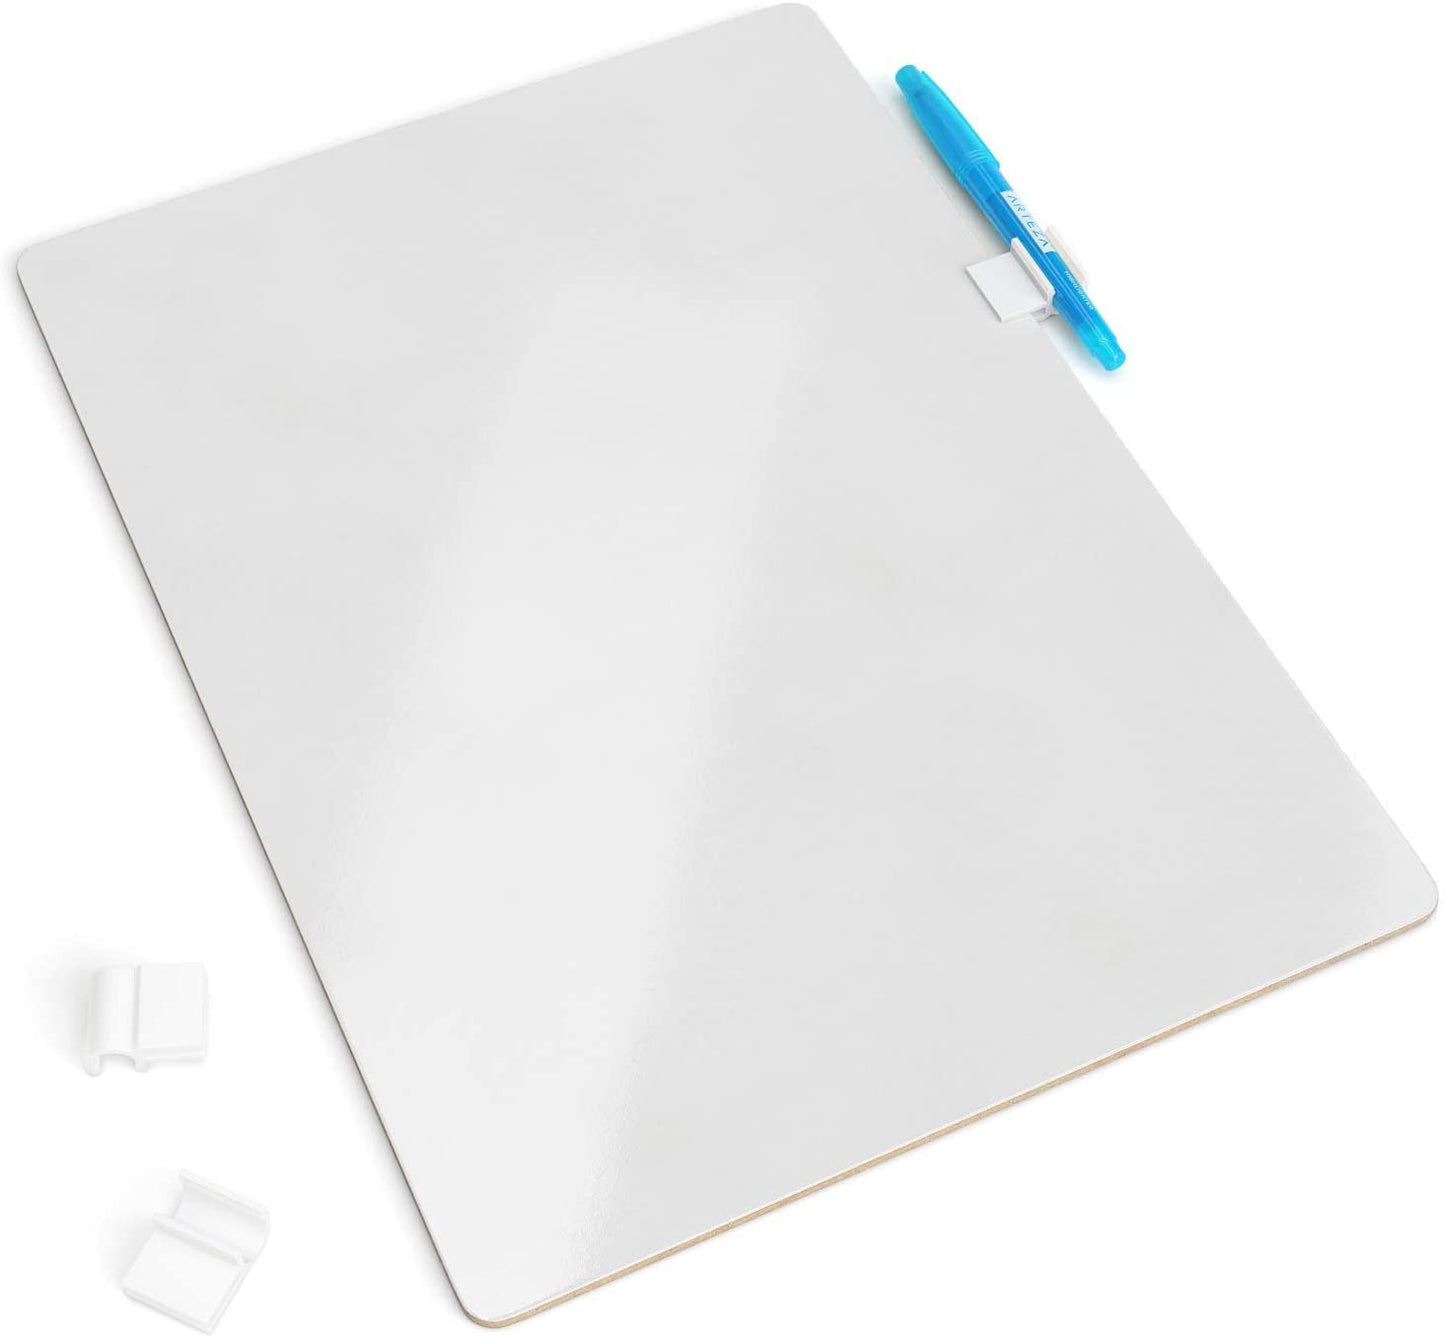 Dry Erase Lapboards, 9" x 12" - Pack of 32